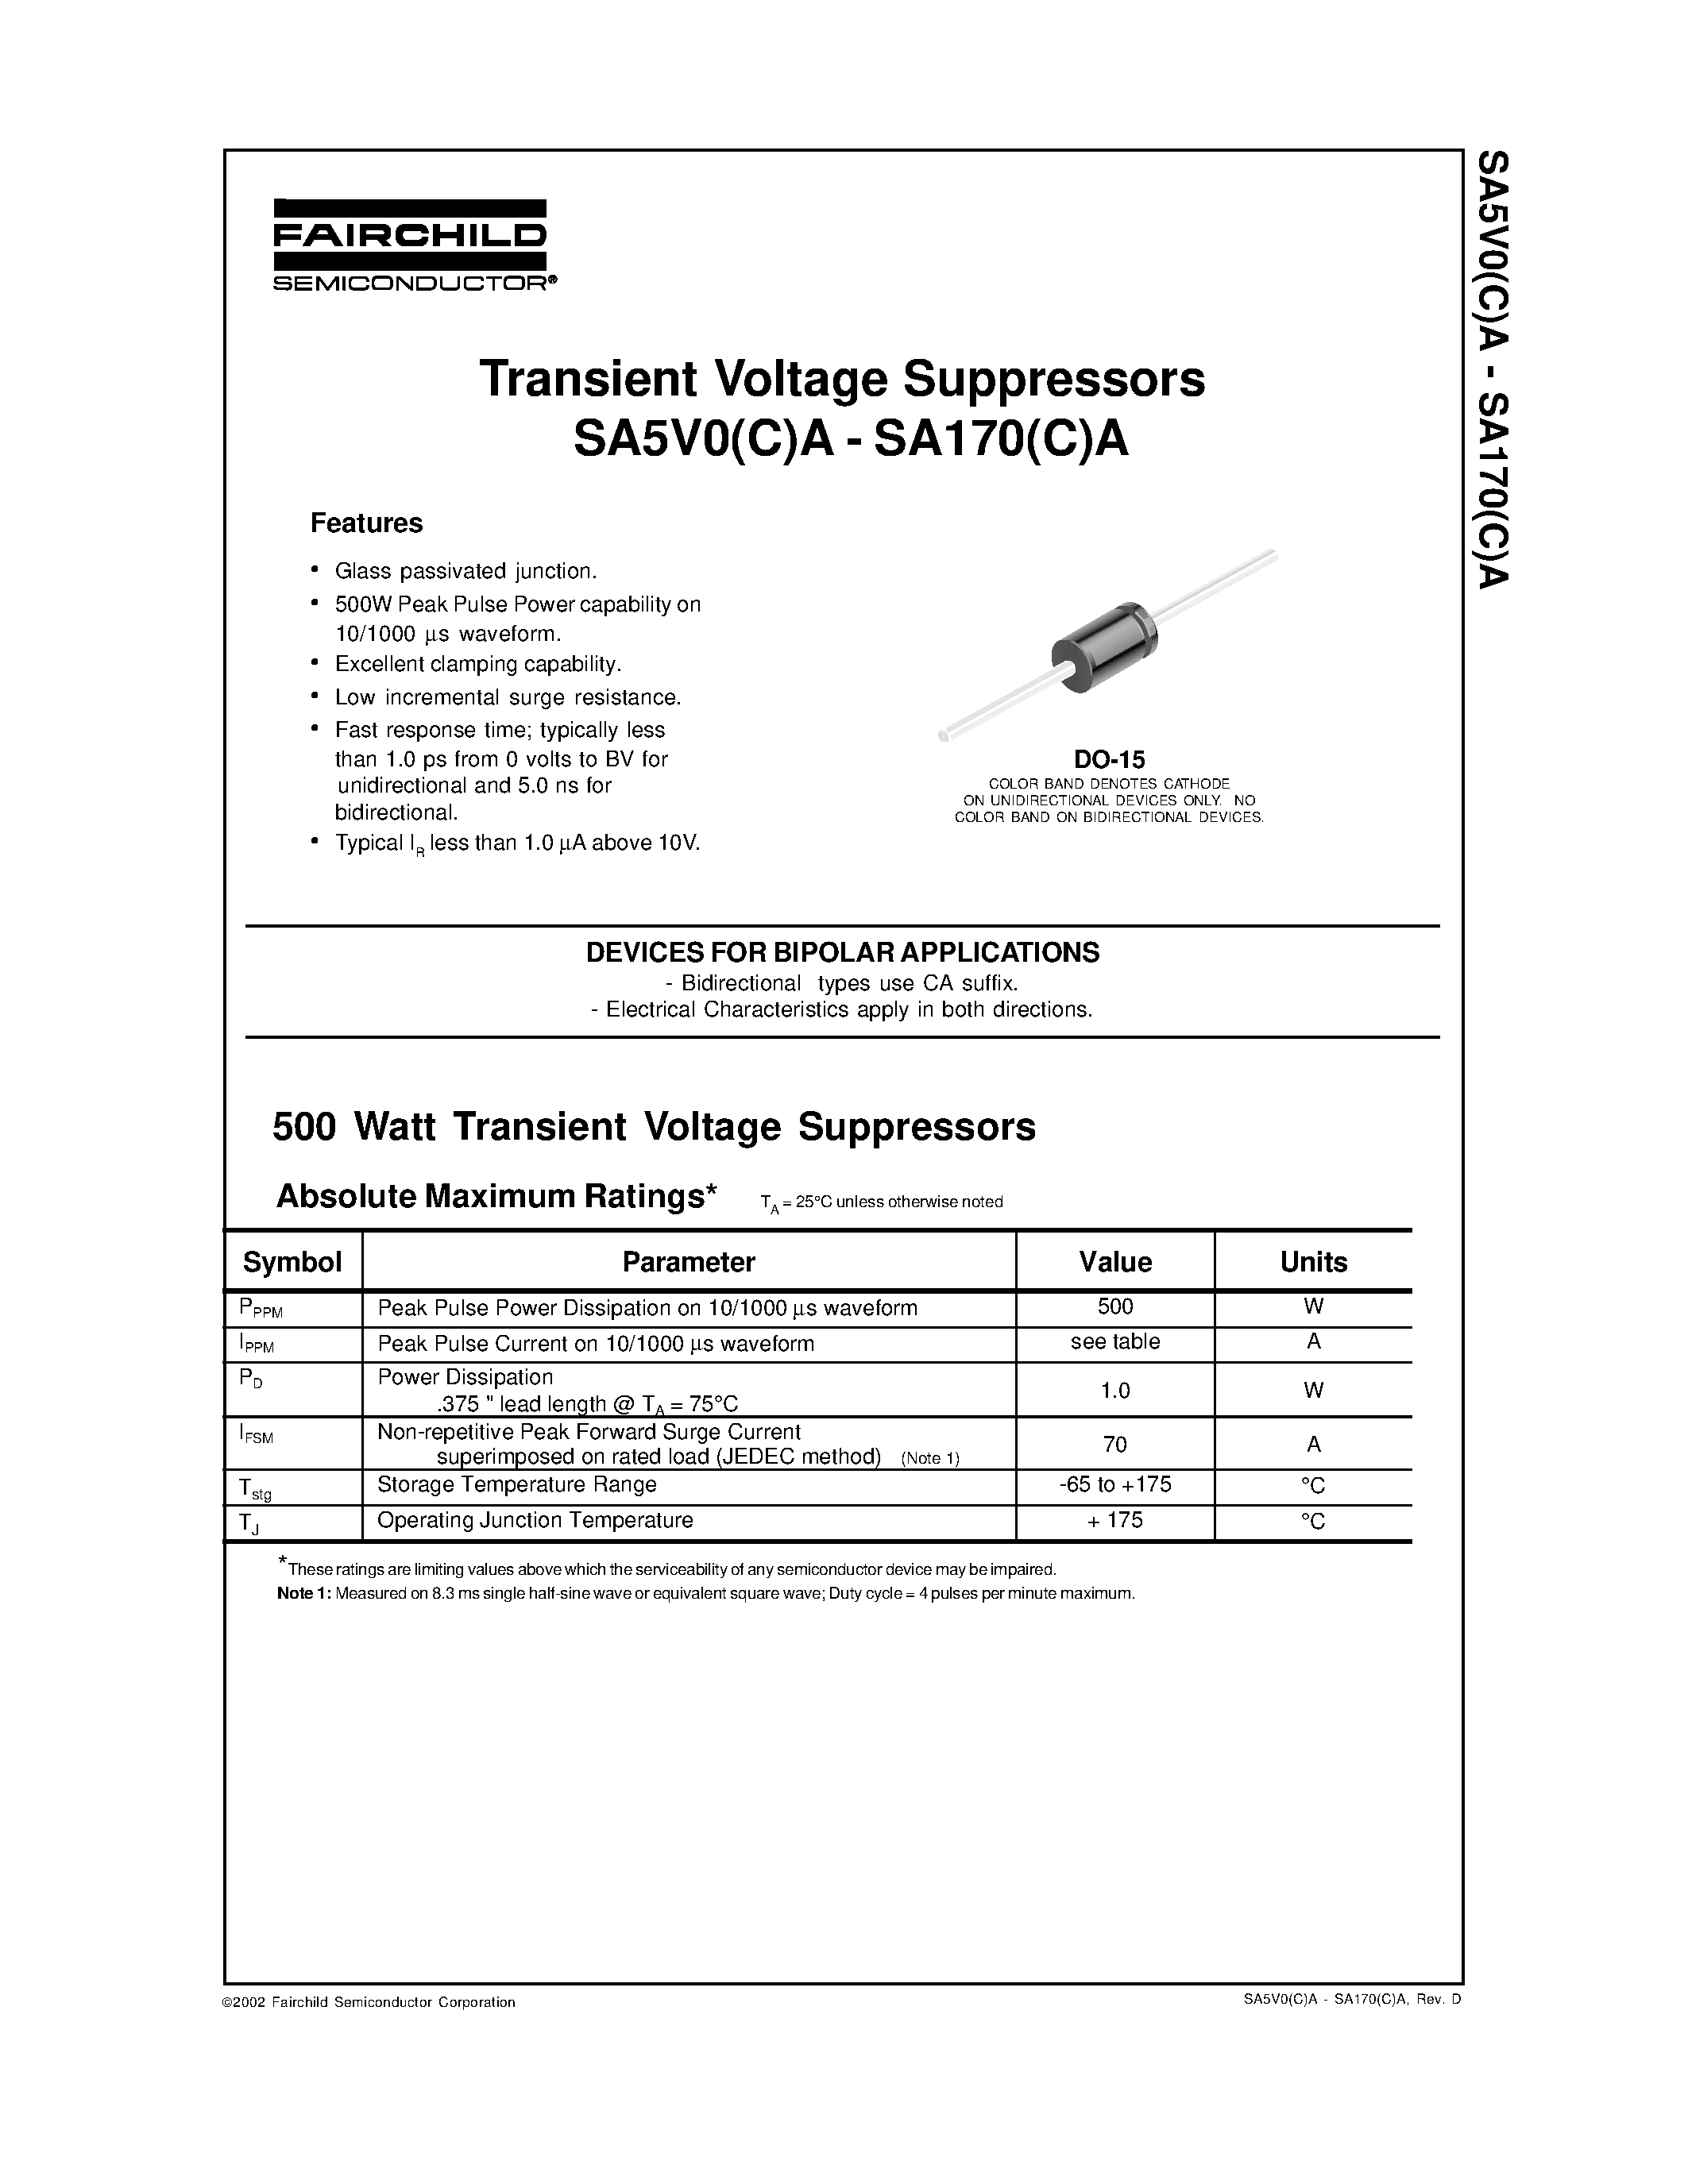 Datasheet SA30A - Transient Voltage Suppressors page 1